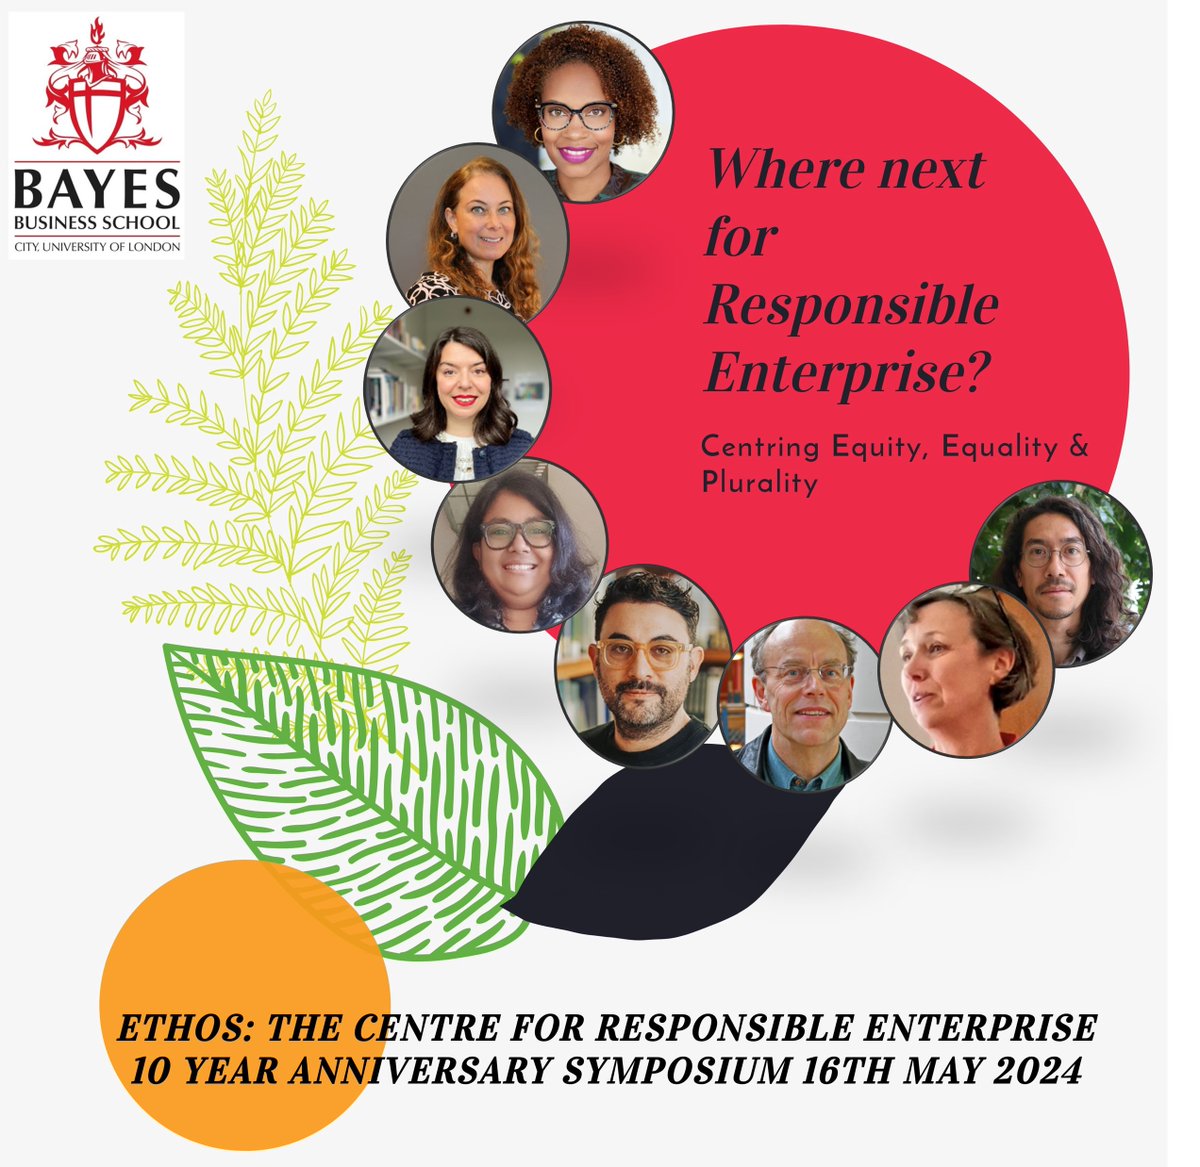 Last chance to register for our fabulous 10 year anniversary symposium! tinyurl.com/4a8hu8ck Thursday 16th May, in person @BayesBSchool & online. With keynotes @Nolywe_ & @banupan, panellists @SamerAbdelnour @Prof_LSpence @dipsikhagm @mosonyi @messiah_naughty, Sebastien Mena